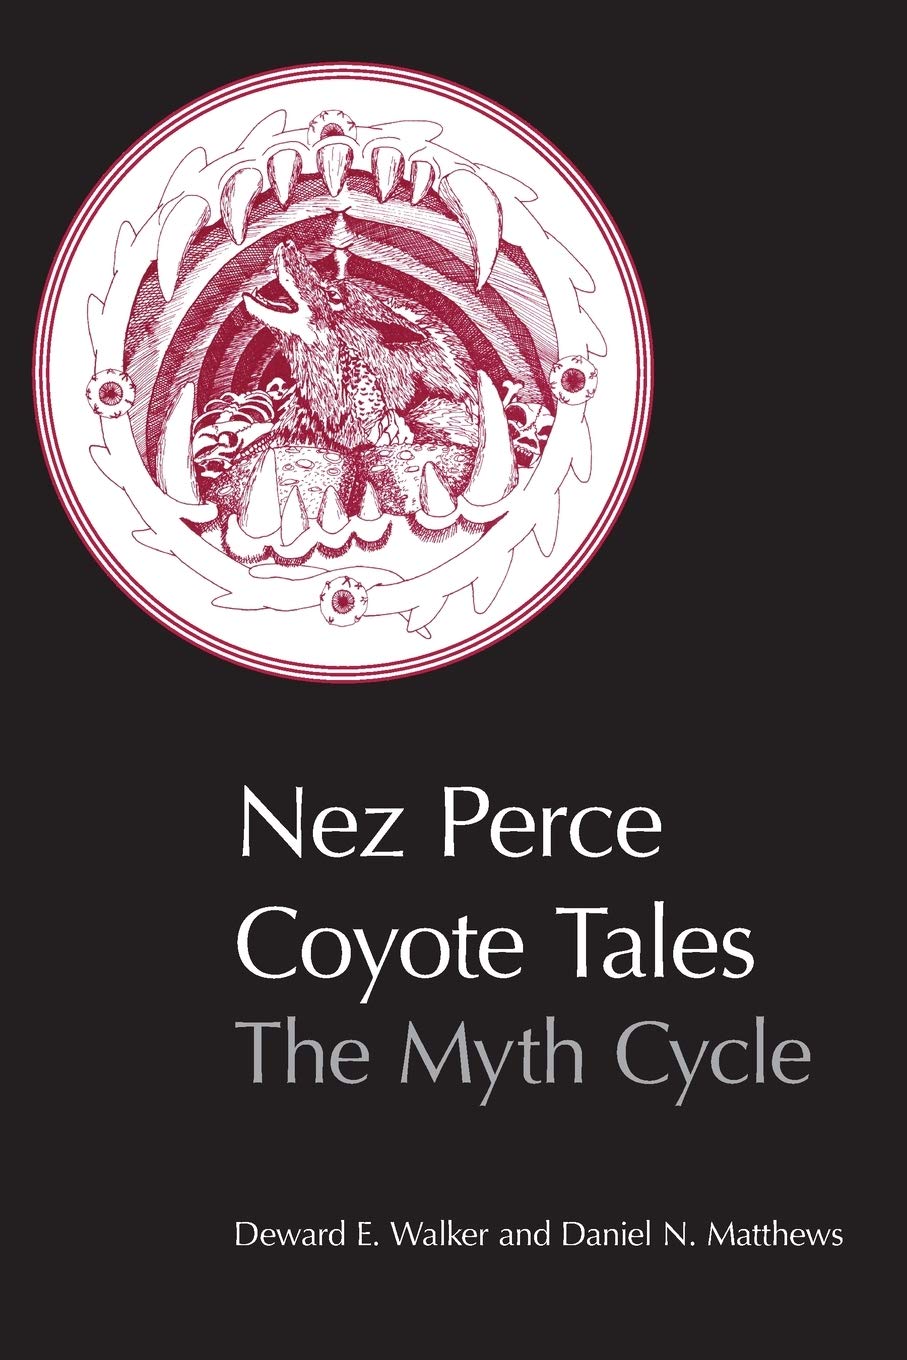 Nez Perce coyote tales: The myth cycle (book cover)